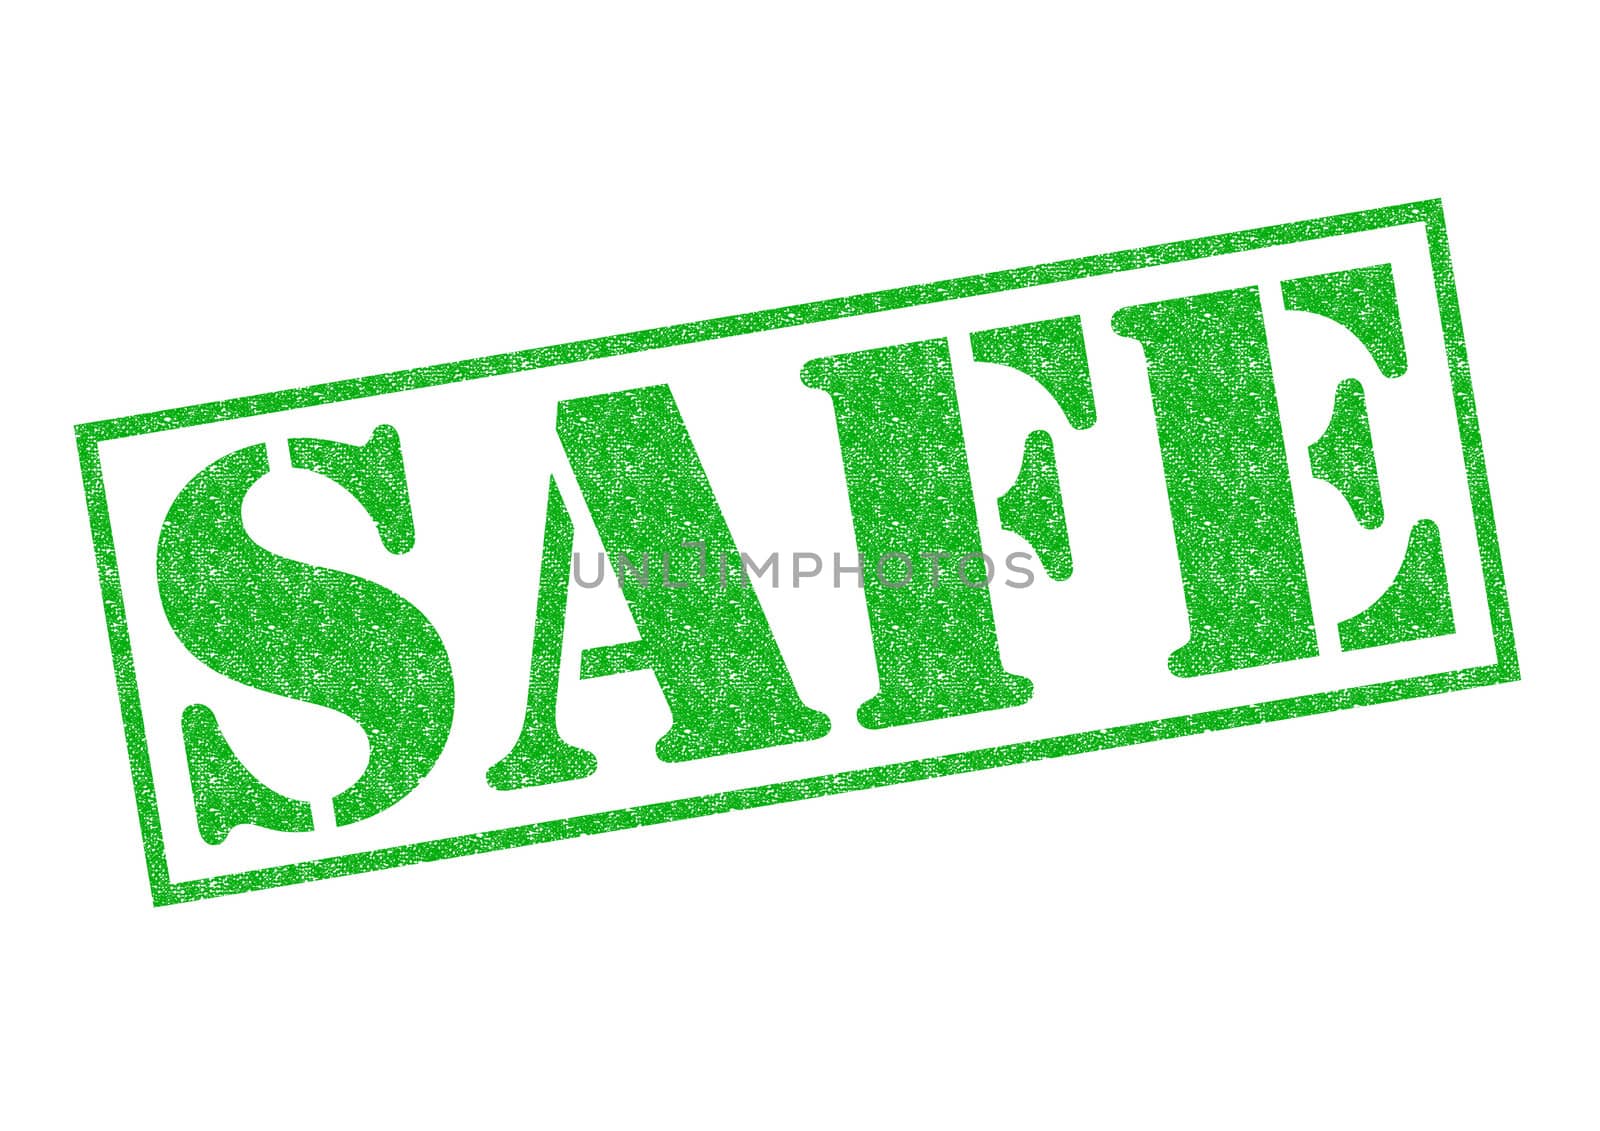 SAFE green Rubber Stamp over a white background.